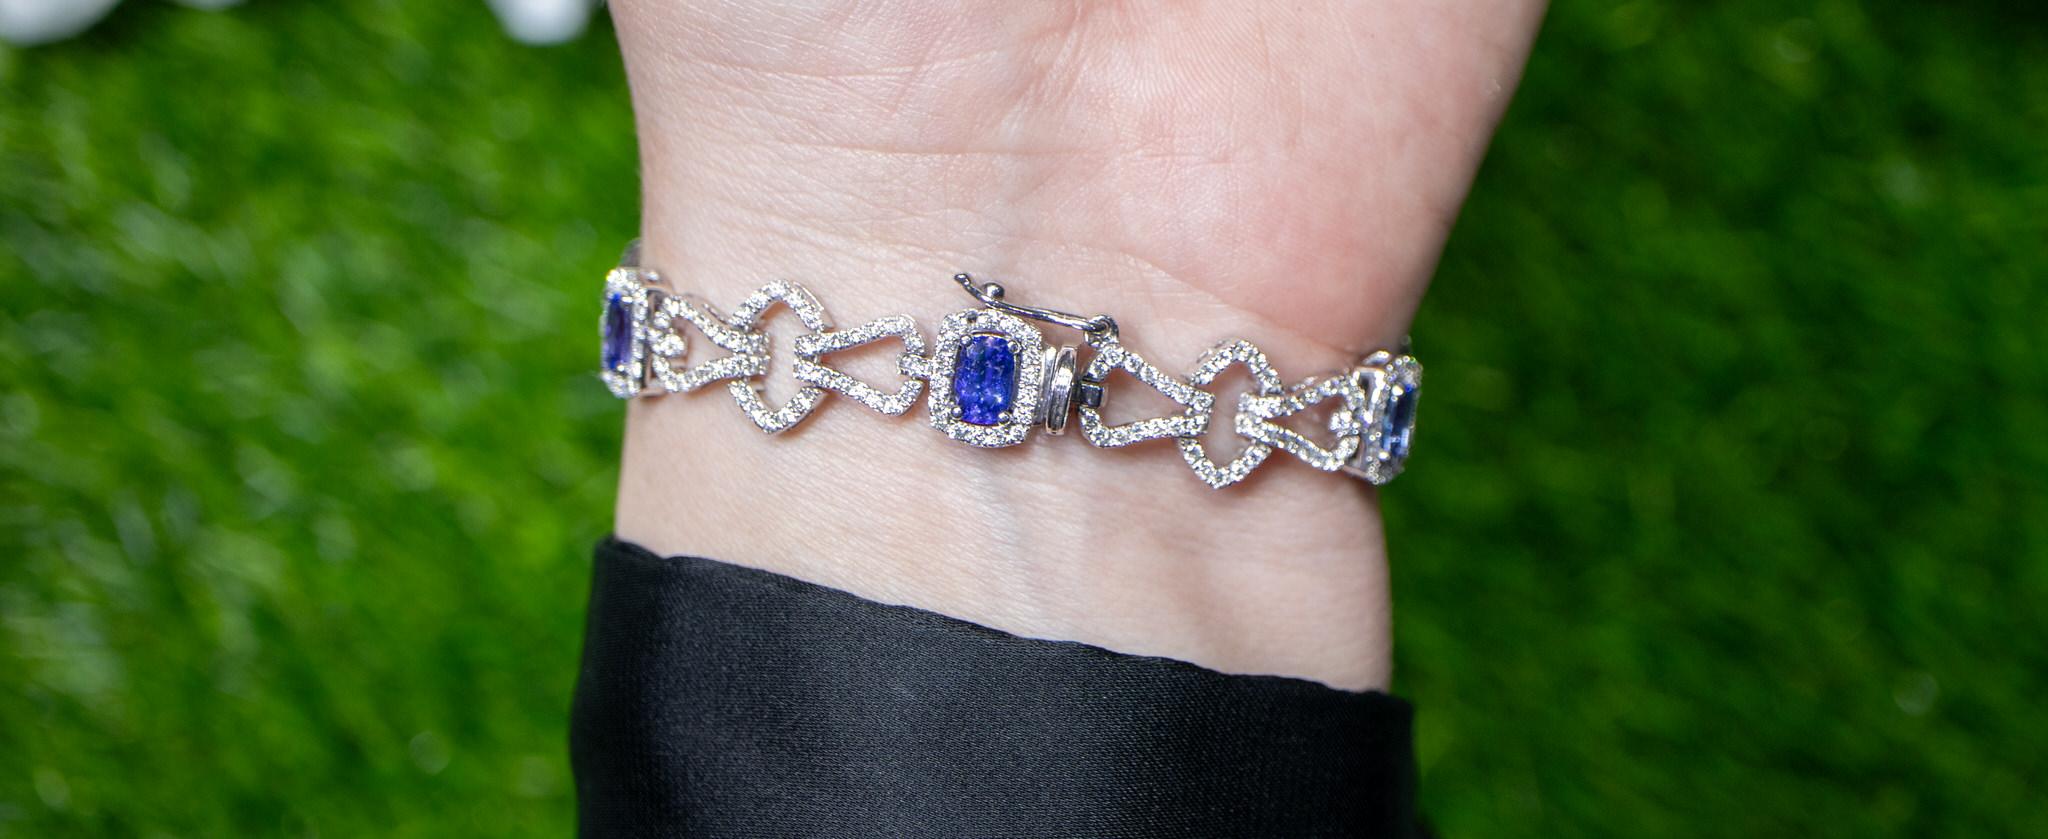 Tanzanite Bracelet Diamond Links 7 Carats 18K Gold In Excellent Condition For Sale In Laguna Niguel, CA